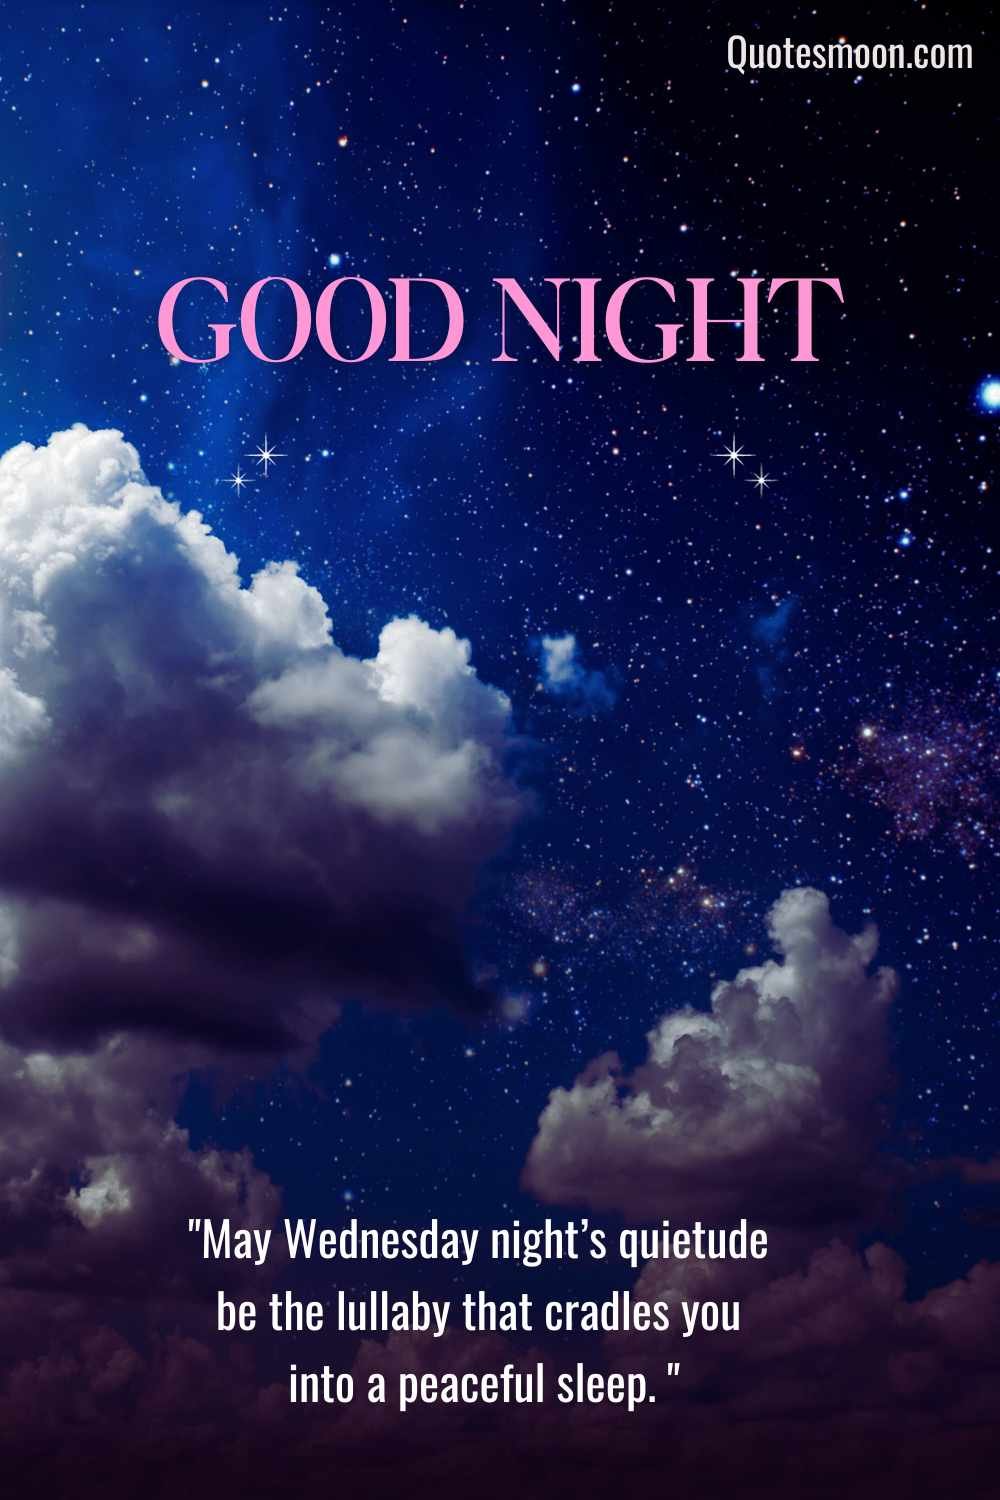 79 Good Night Wednesday Quotes For A Beautiful Sleep - Quotesmoon